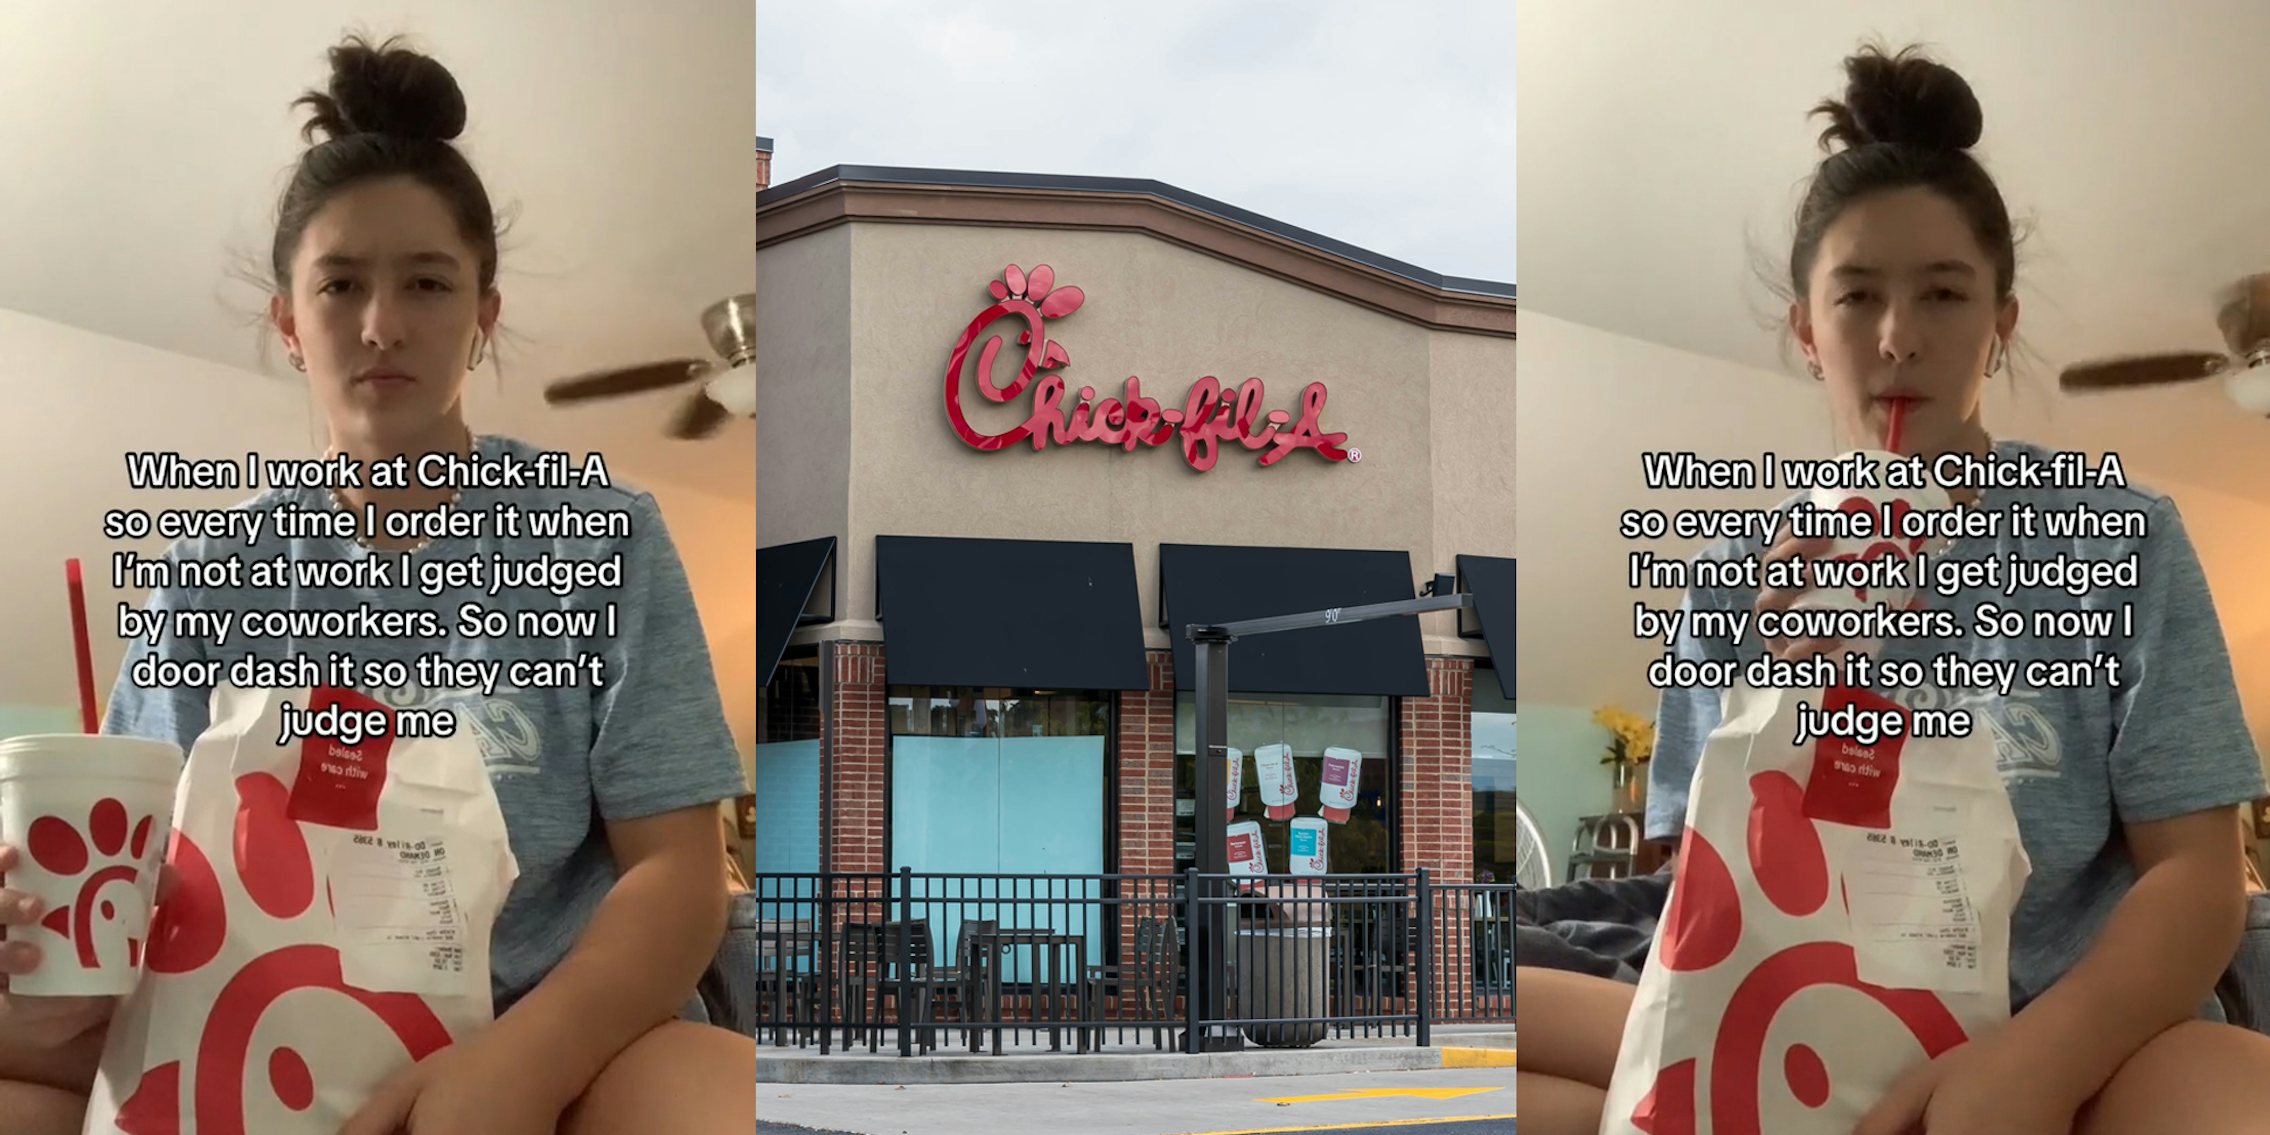 Chick-fil-A worker with food with caption 'When I work at Chick-fil-A so every time I order it when I'm not at work I get judged by my coworkers. So now I door dash it so they can't judge me' (l) Chick-fil-A building with sign (c) Chick-Fil-A worker with food with caption 'When I work at Chick-fil-A so every time I order it when I'm not at work I get judged by my coworkers. So now I door dash it so they can't judge me' (r)